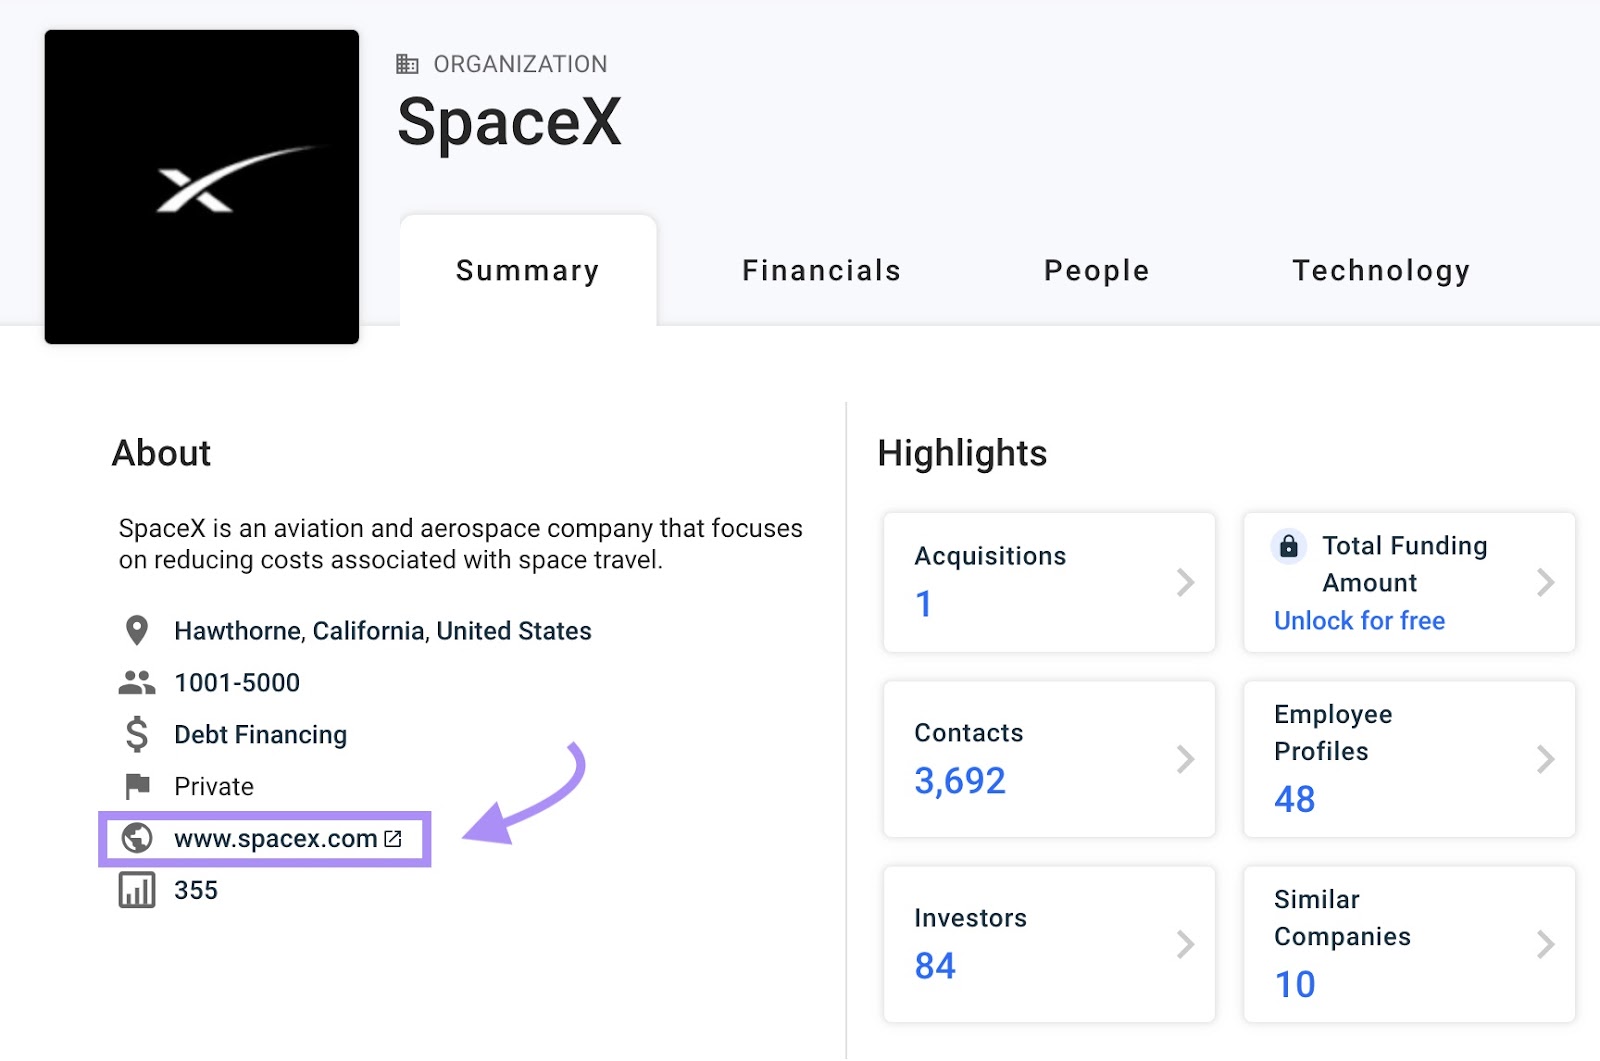 SpaceX's profile on Crunchbase links to "www.spacex.com"